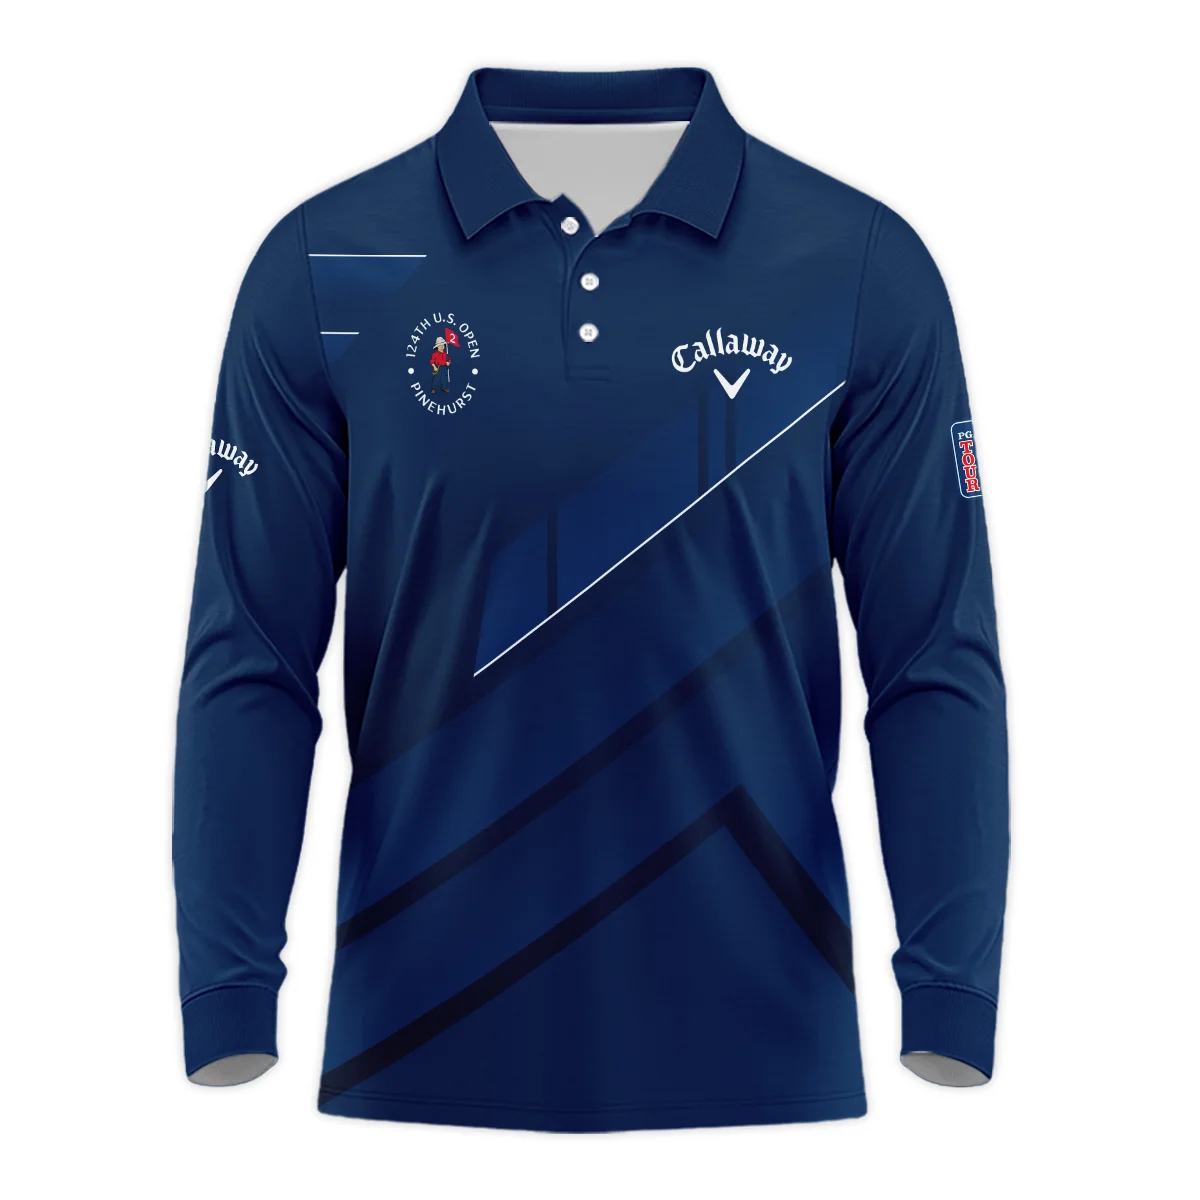 Callaway 124th U.S. Open Pinehurst Blue Gradient With White Straight Line Vneck Long Polo Shirt Style Classic Long Polo Shirt For Men